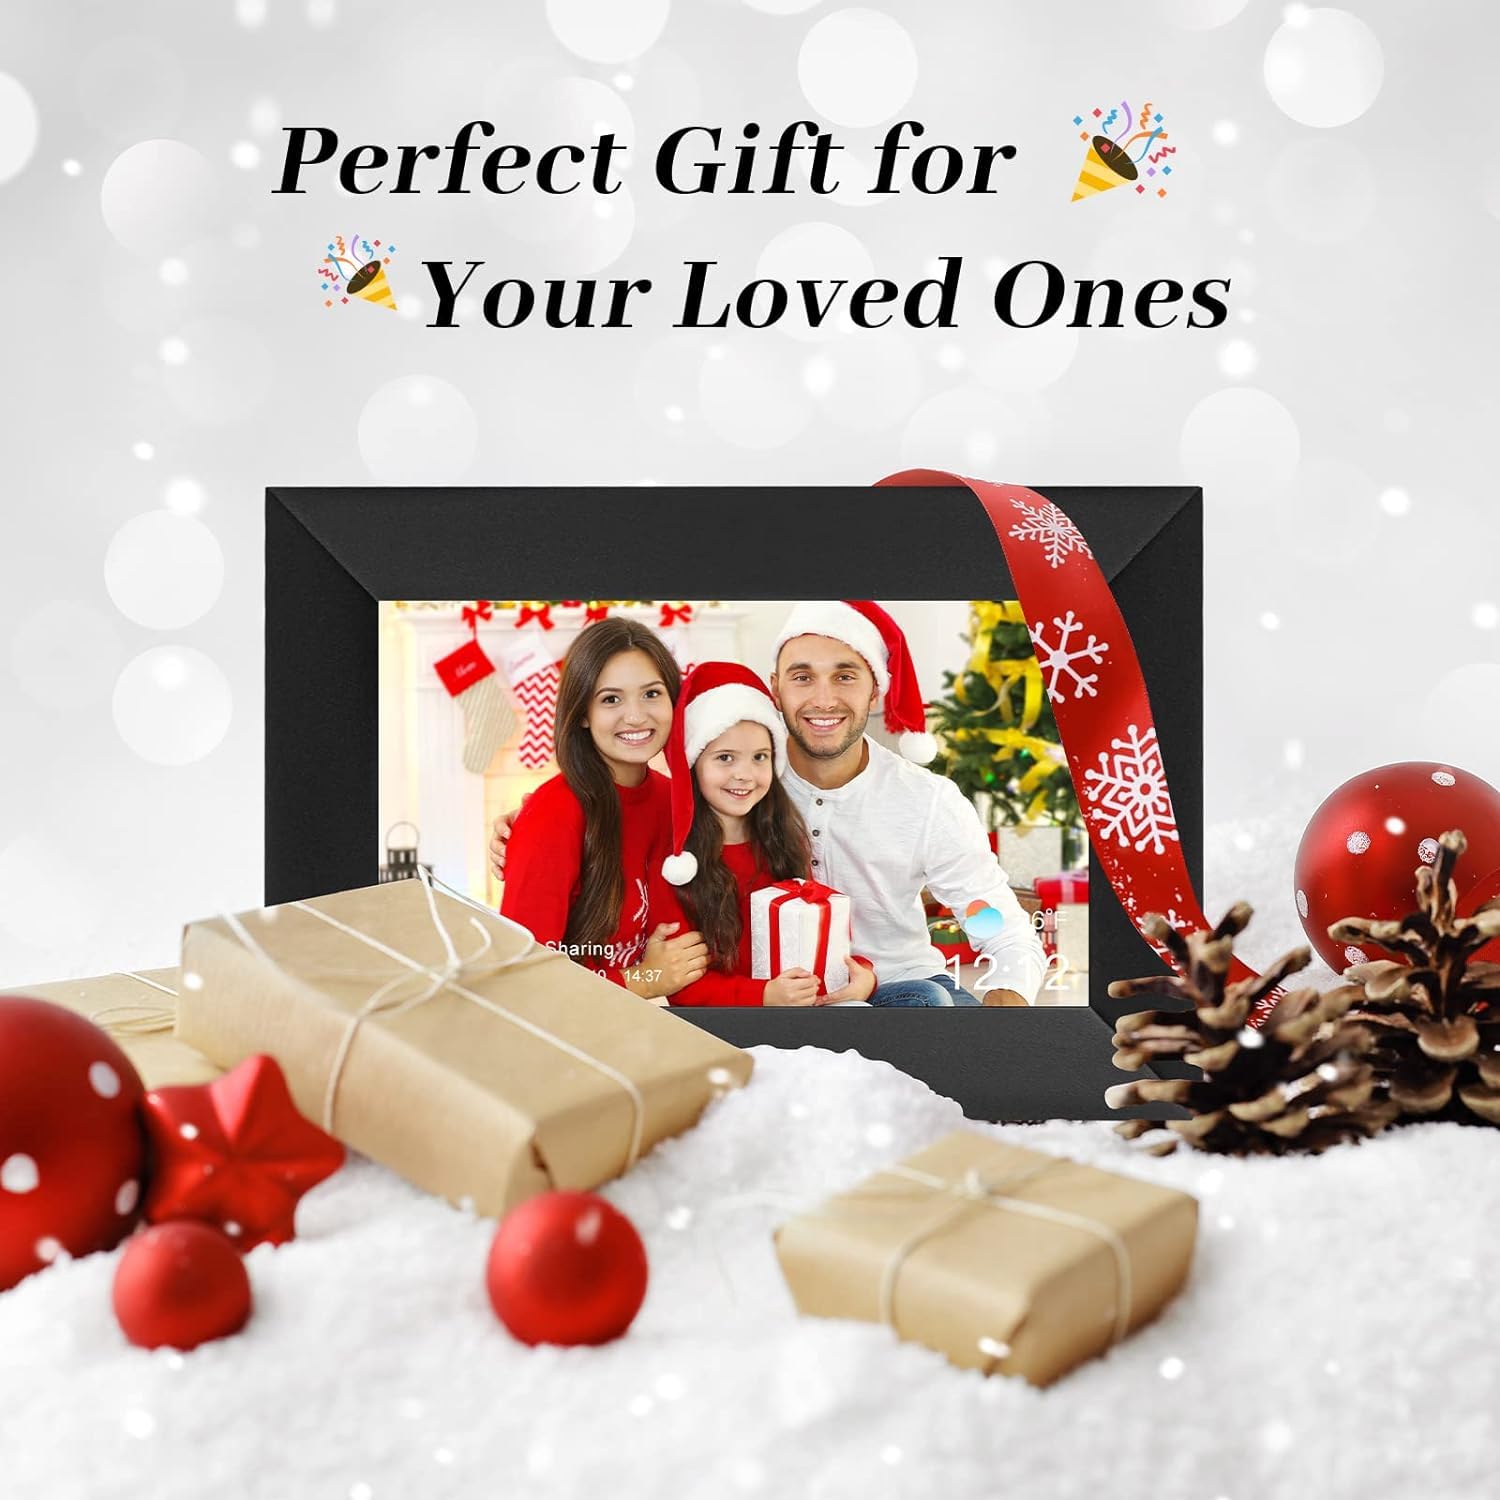 Anna Bella Digital Picture Frame 7 Inch WiFi Digital Photo Frame with 1024 * 600 IPS Touch Screen Built-in Smart Core 8GB Inter Storage Auto-Rotate, Share Photos and Videos Instantly Via AiMOR